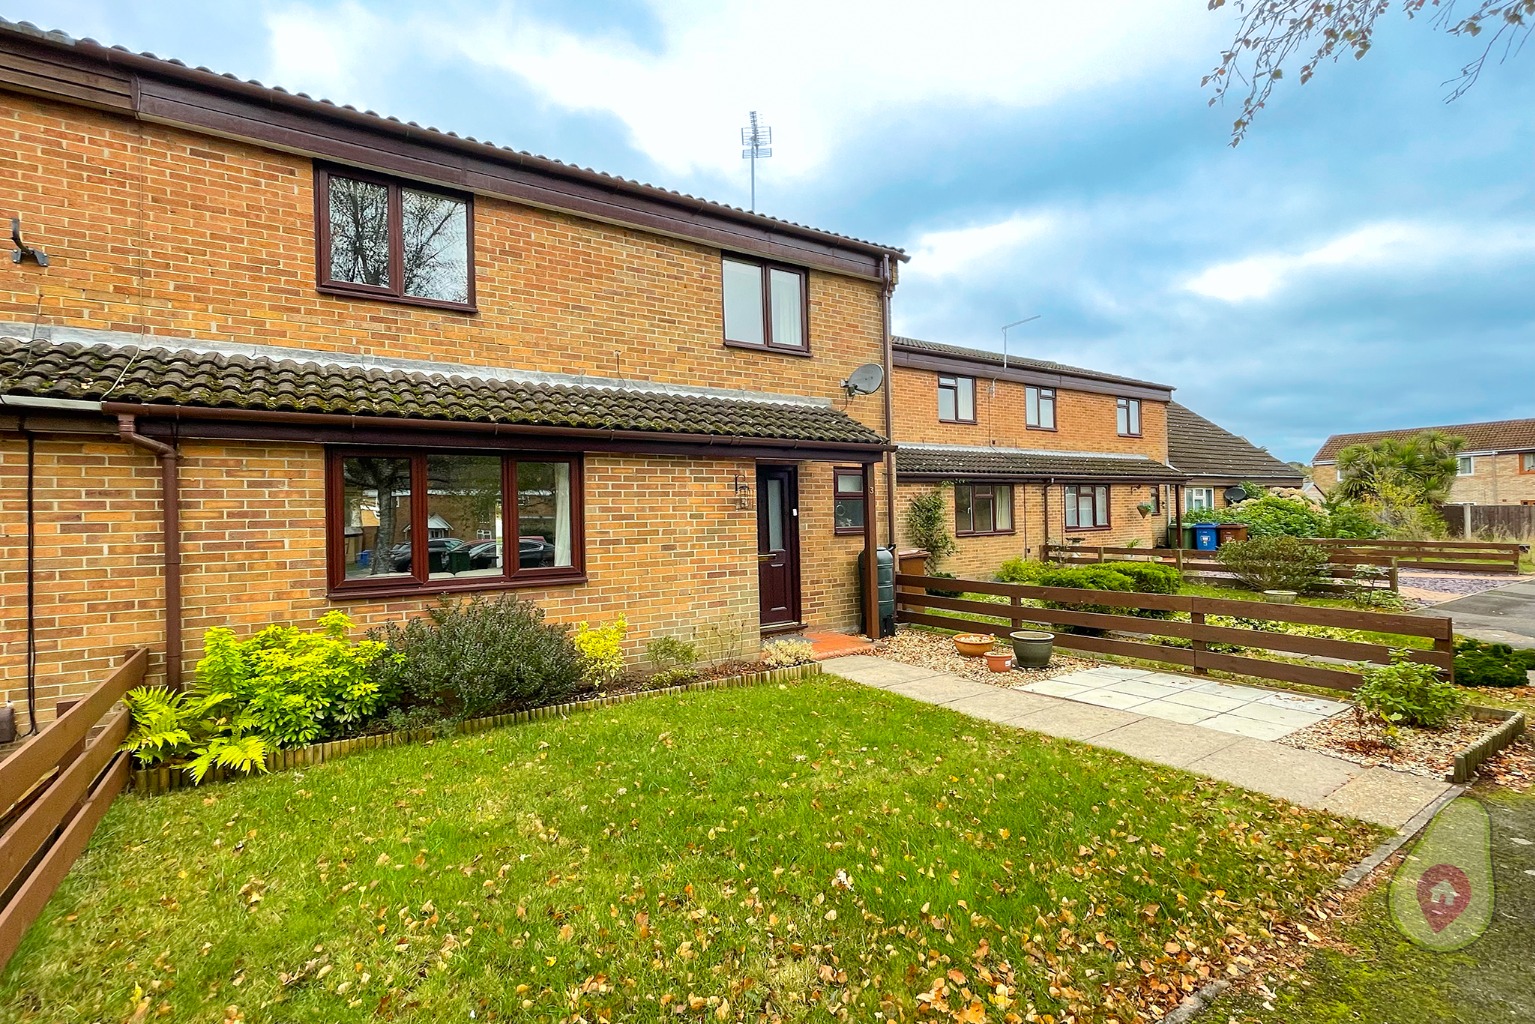 A simply stunning 3 bedroom home, with wonderful improvements made by the current owners making it a home most people will aspire to. From the vast open plan Kitchen/Dining Room to the beautifully specified bathroom and the landscaped garden that is just perfect for entertaining.